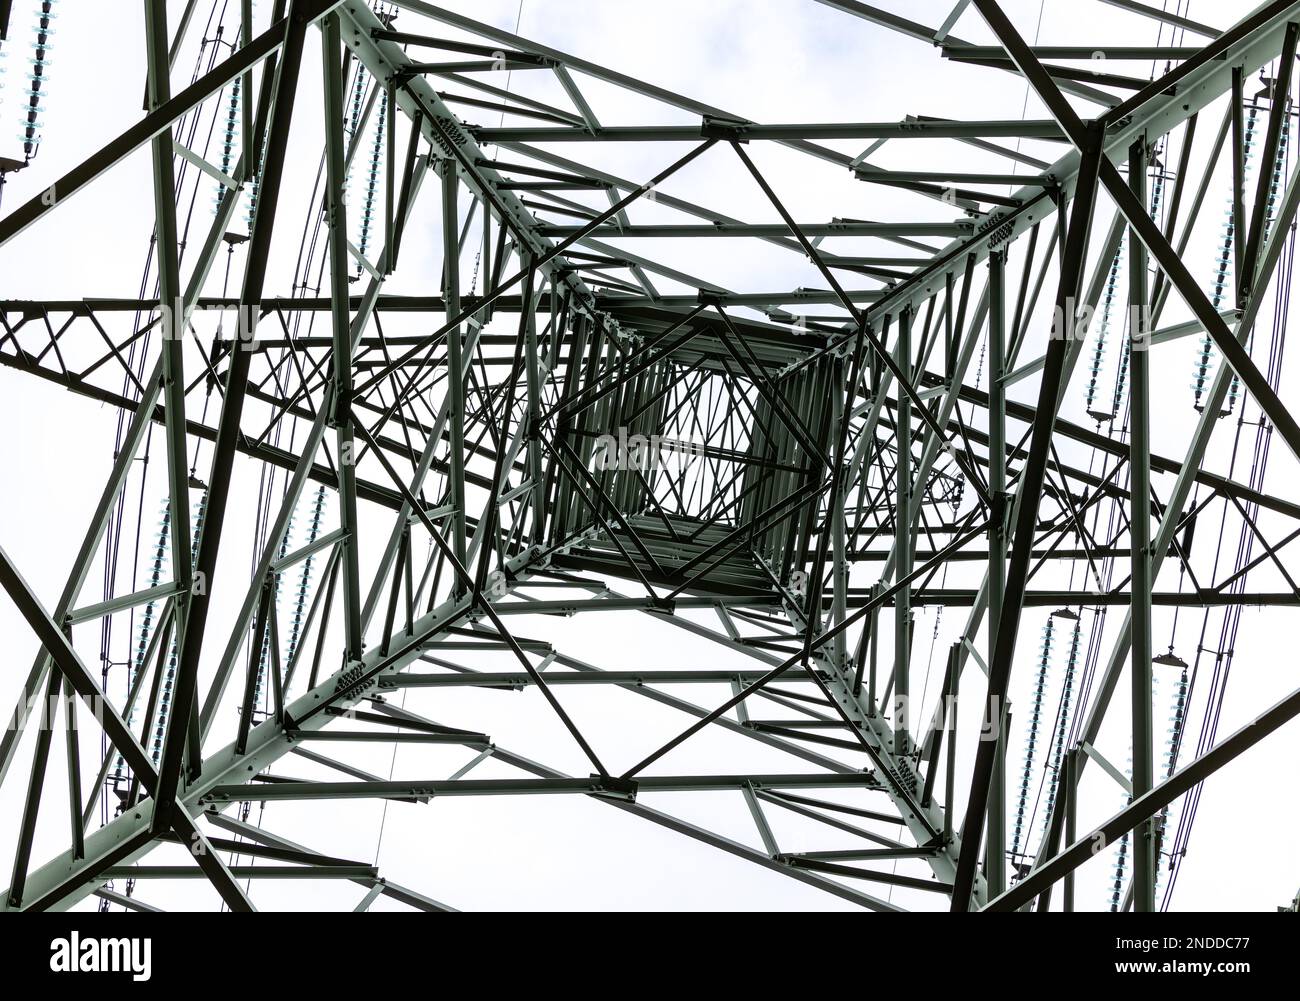 High-voltage pylon seen from the position of the person standing underneath. High voltage transmission lines Stock Photo